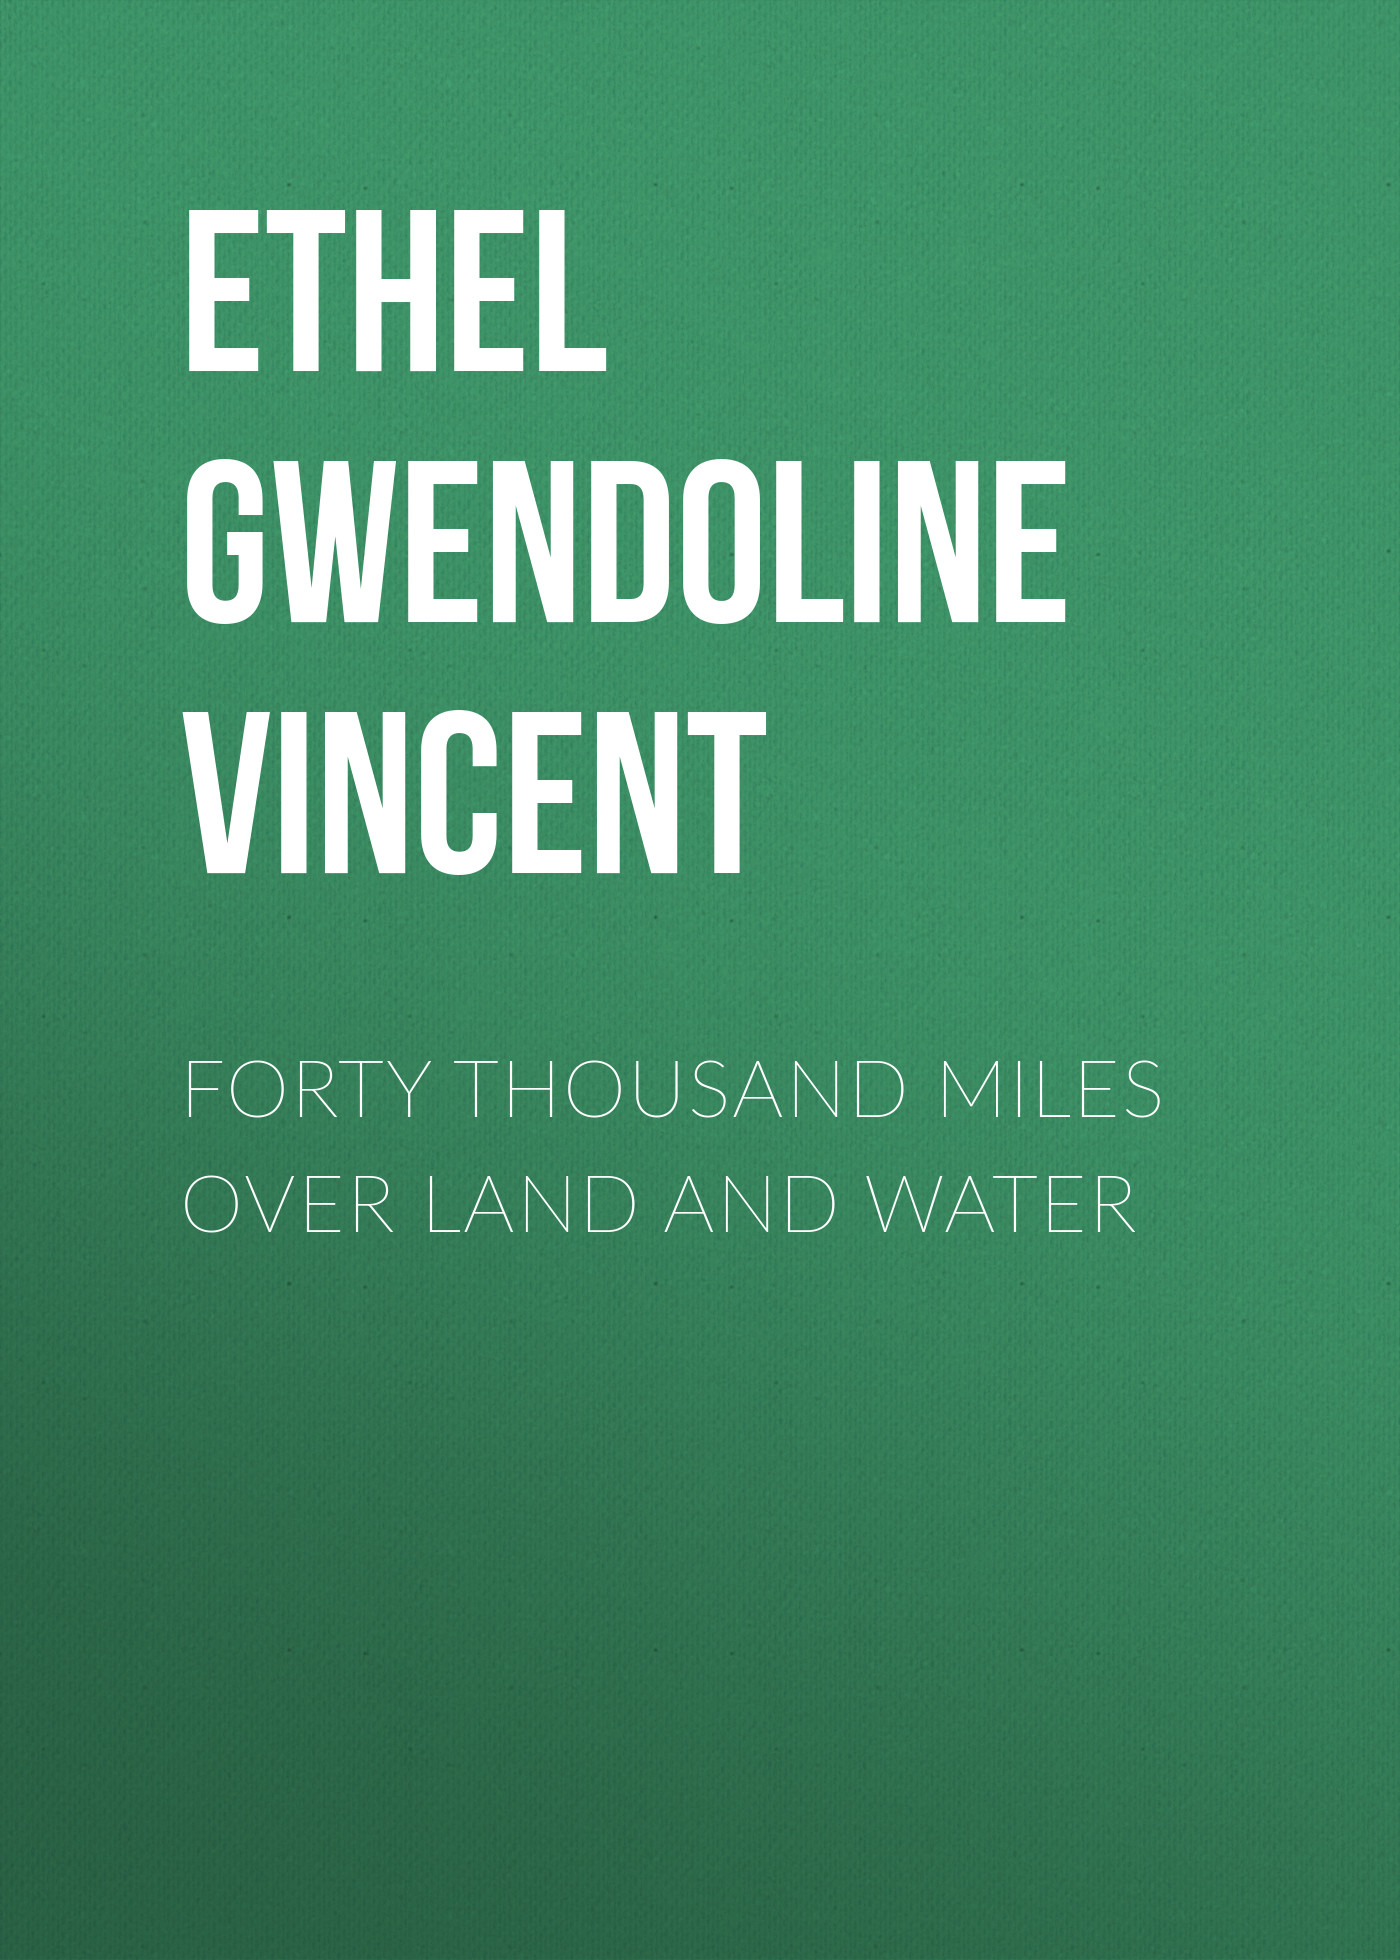 Ethel Gwendoline Vincent Forty Thousand Miles Over Land and Water